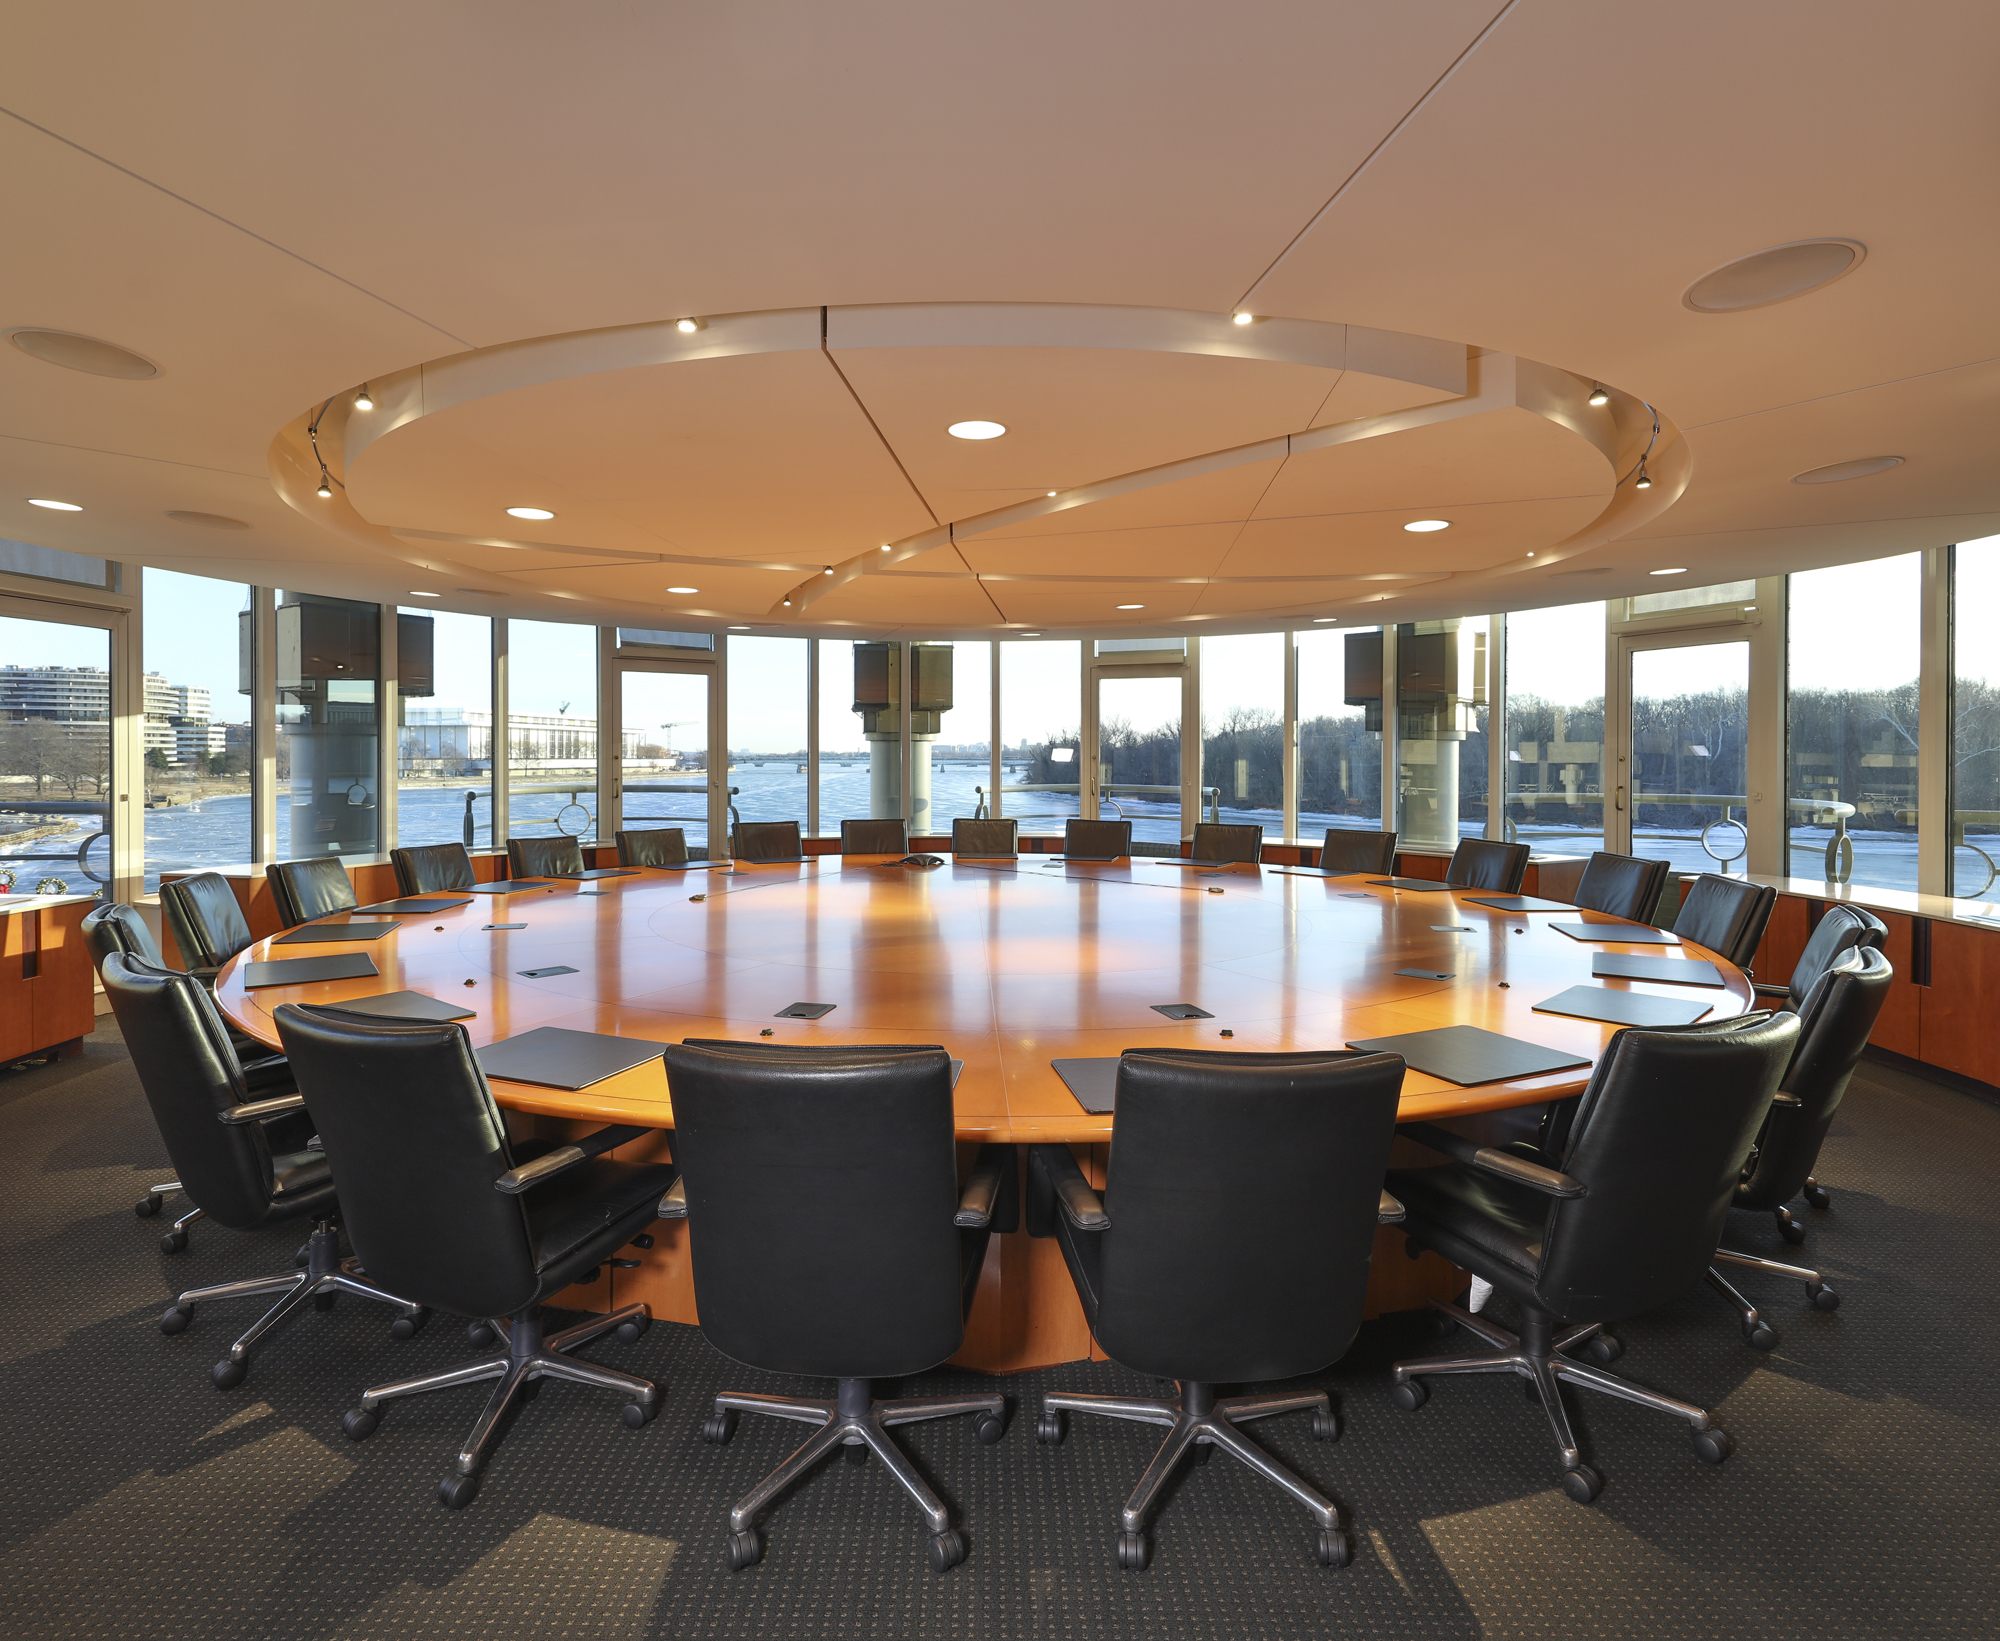 Circular conference room on the Georgetown waterfront